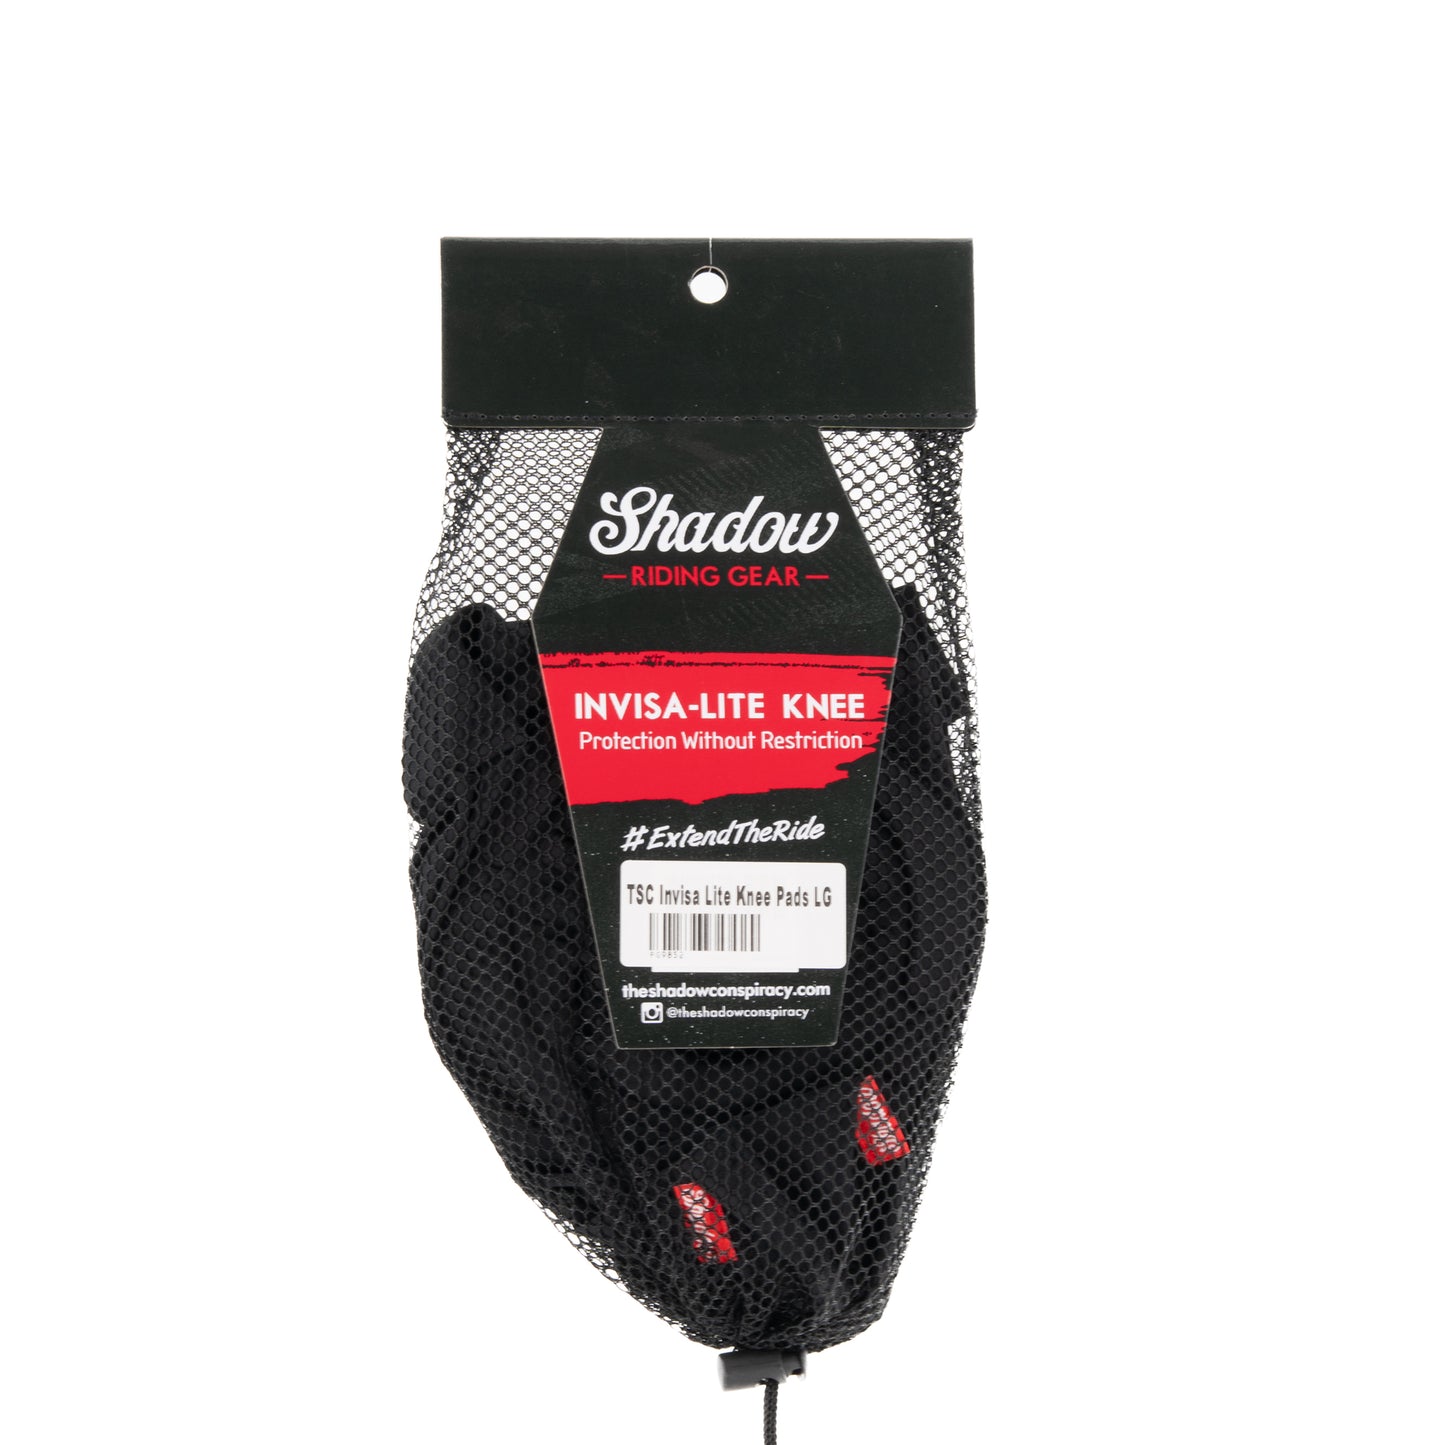 THE SHADOW CONSPIRACY INVISA-LITE KNEE PADS